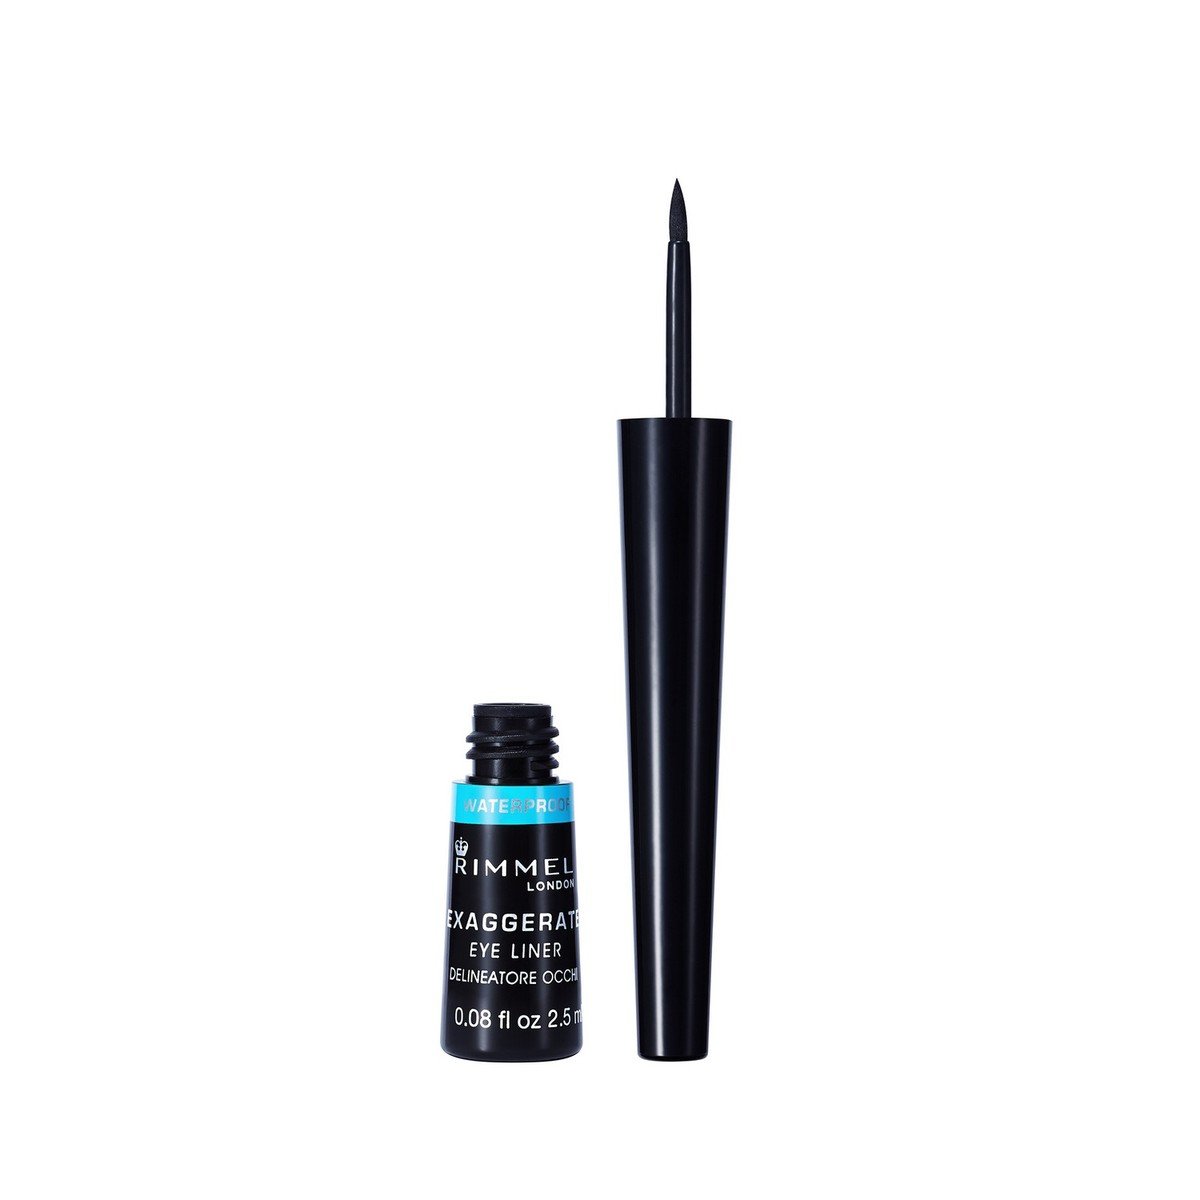 Rimmel London Exaggerate Waterproof Liquid Eyeliner Black. A Black Shade With A Glossy Finish 1pc